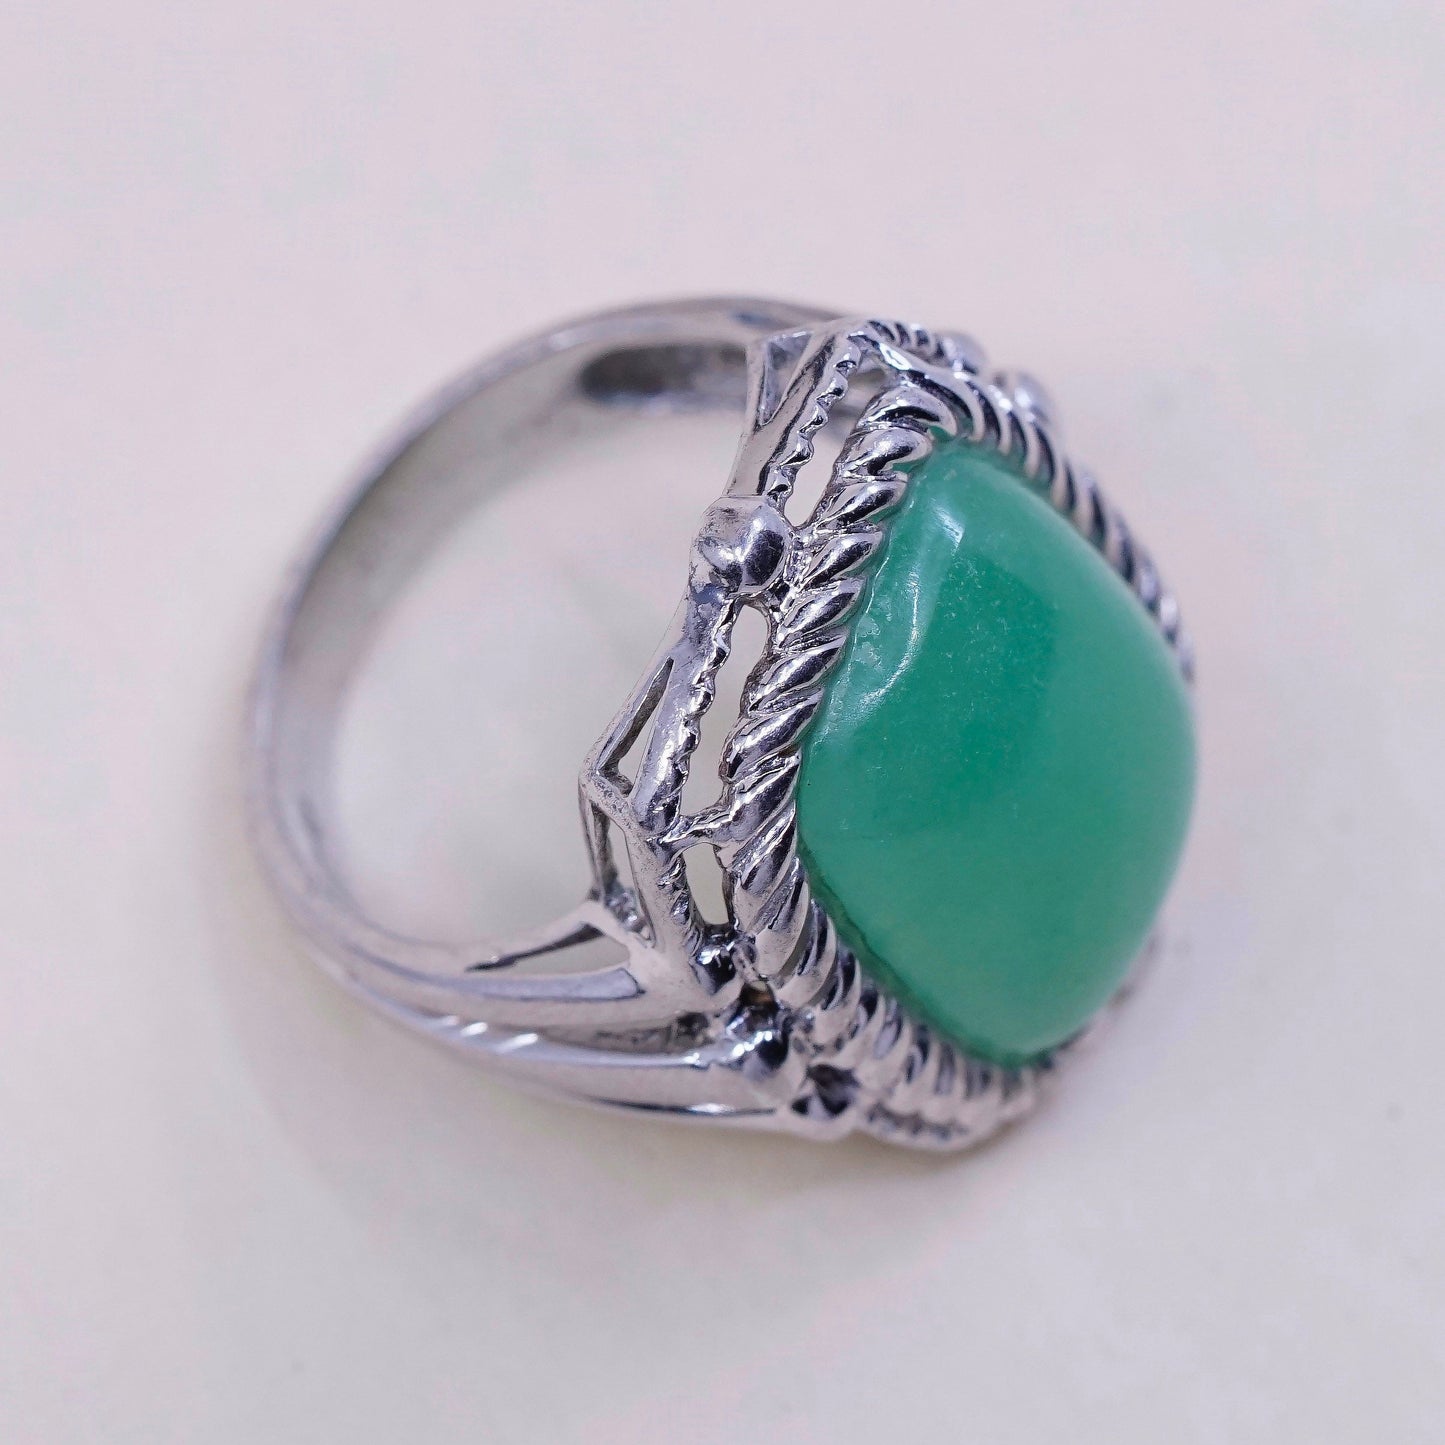 Size 7.25, Vintage sterling silver handmade ring, ring with jade and cable